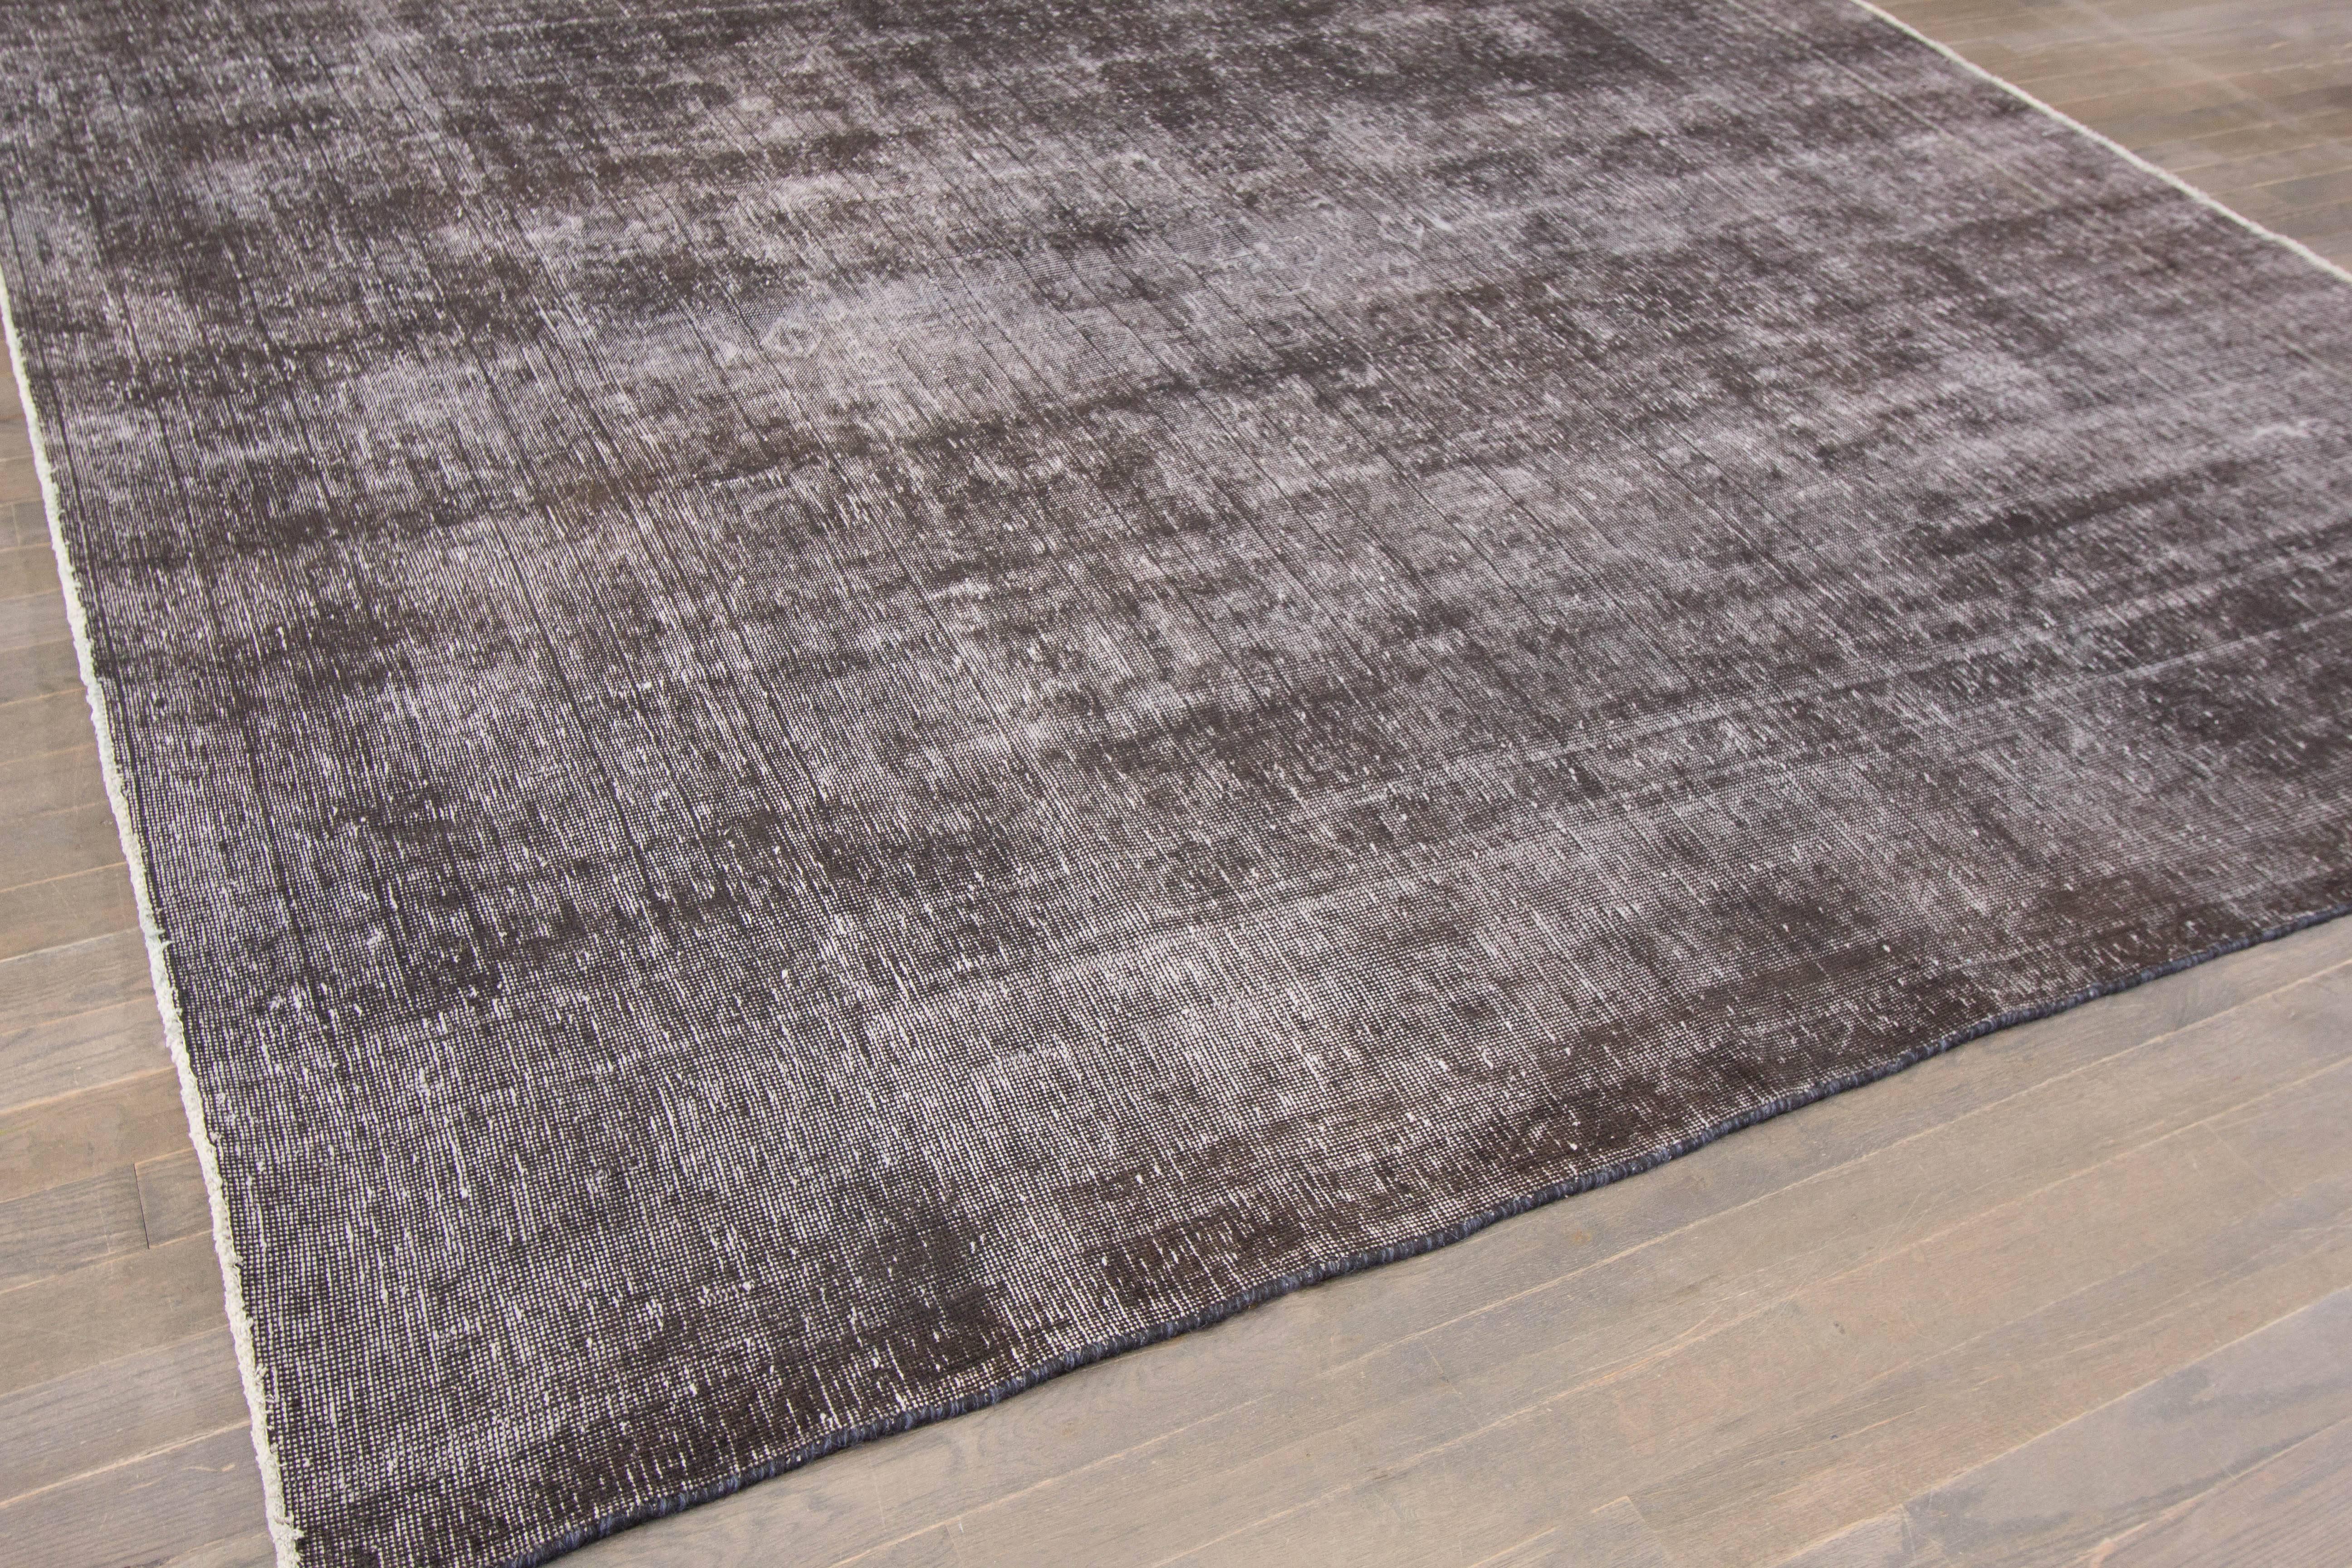 A hand-knotted square Overdyed rug with an all-over design on a grey field. Accents of brown and ivory throughout the piece. This rug measures 9'.4 x 9'.6.